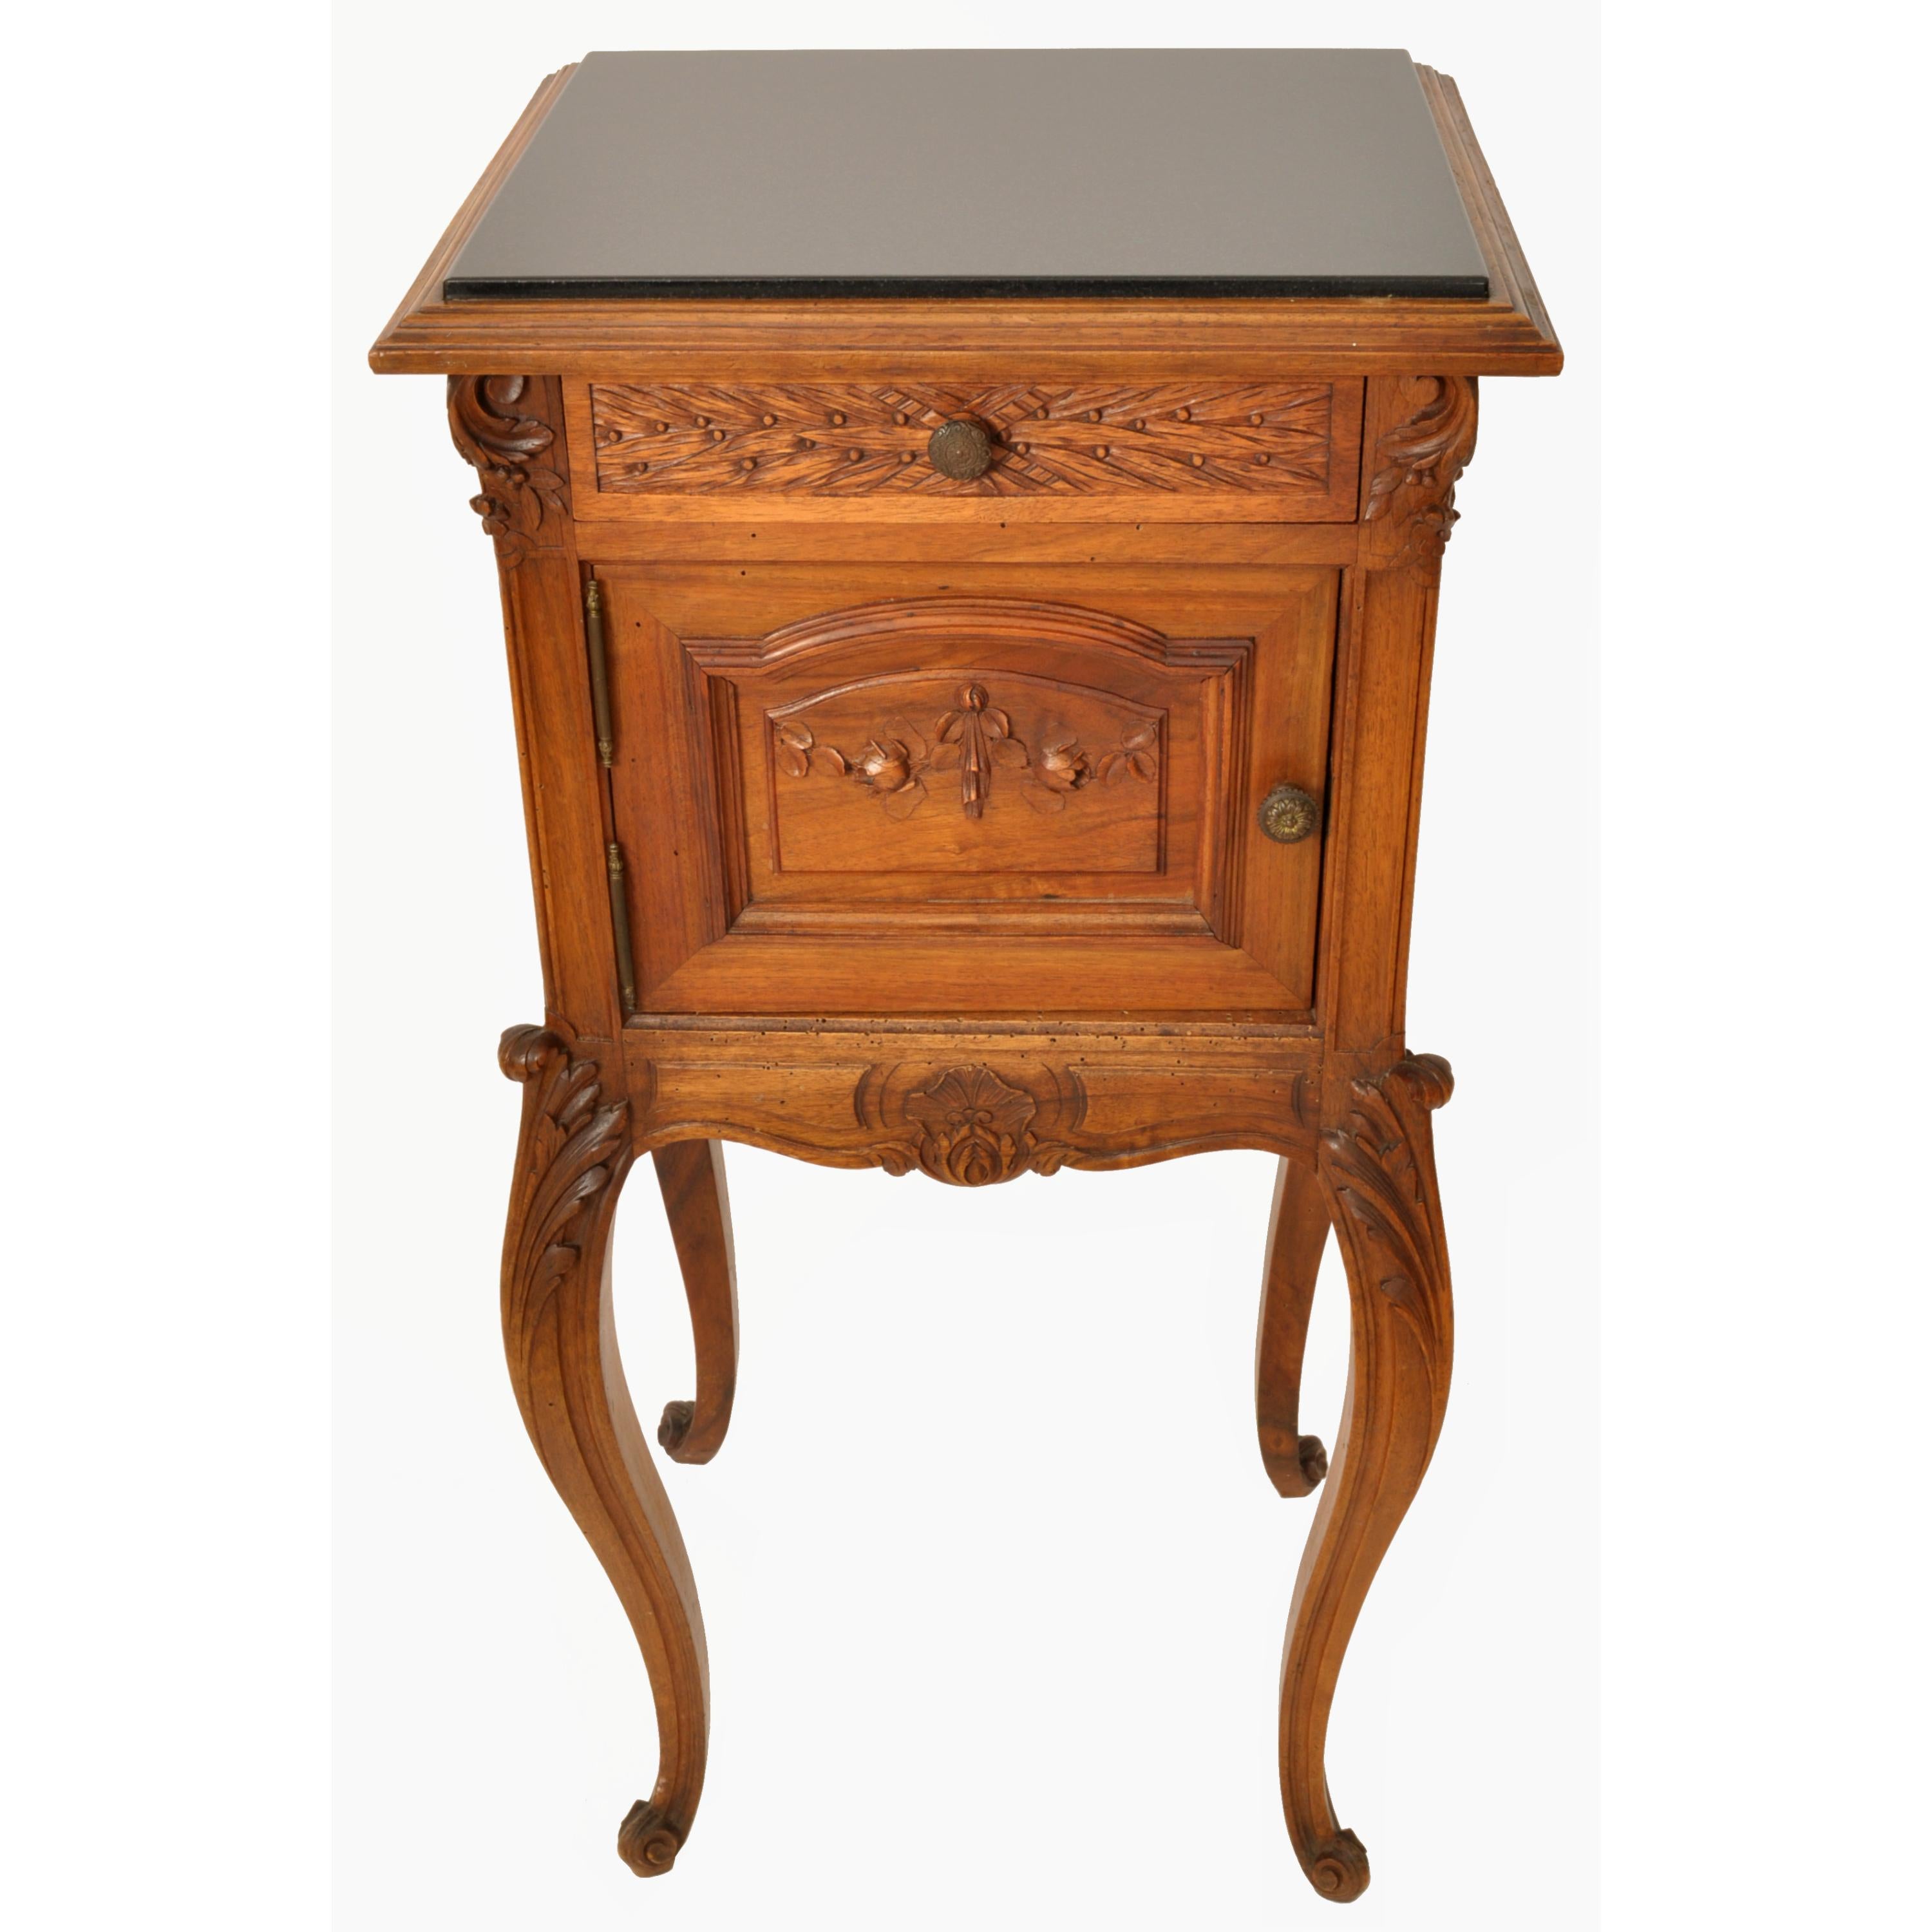 Late 19th Century Antique French Provincial Louis XVI Carved Walnut & Marble Nightstand Table 1880